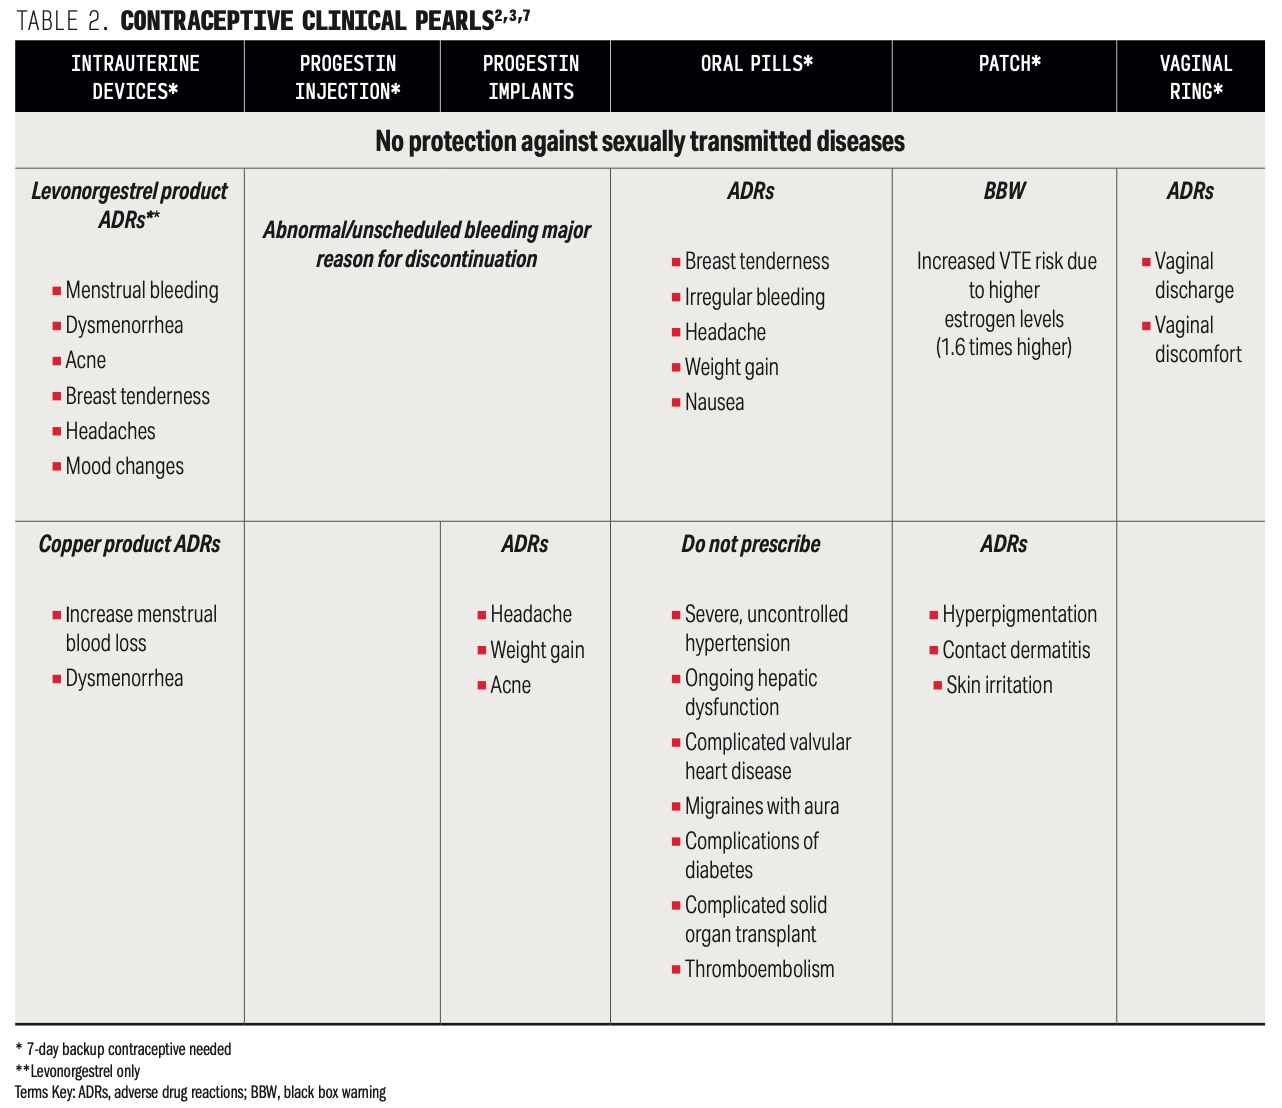 Table 2. Contraceptive Clinical Pearls